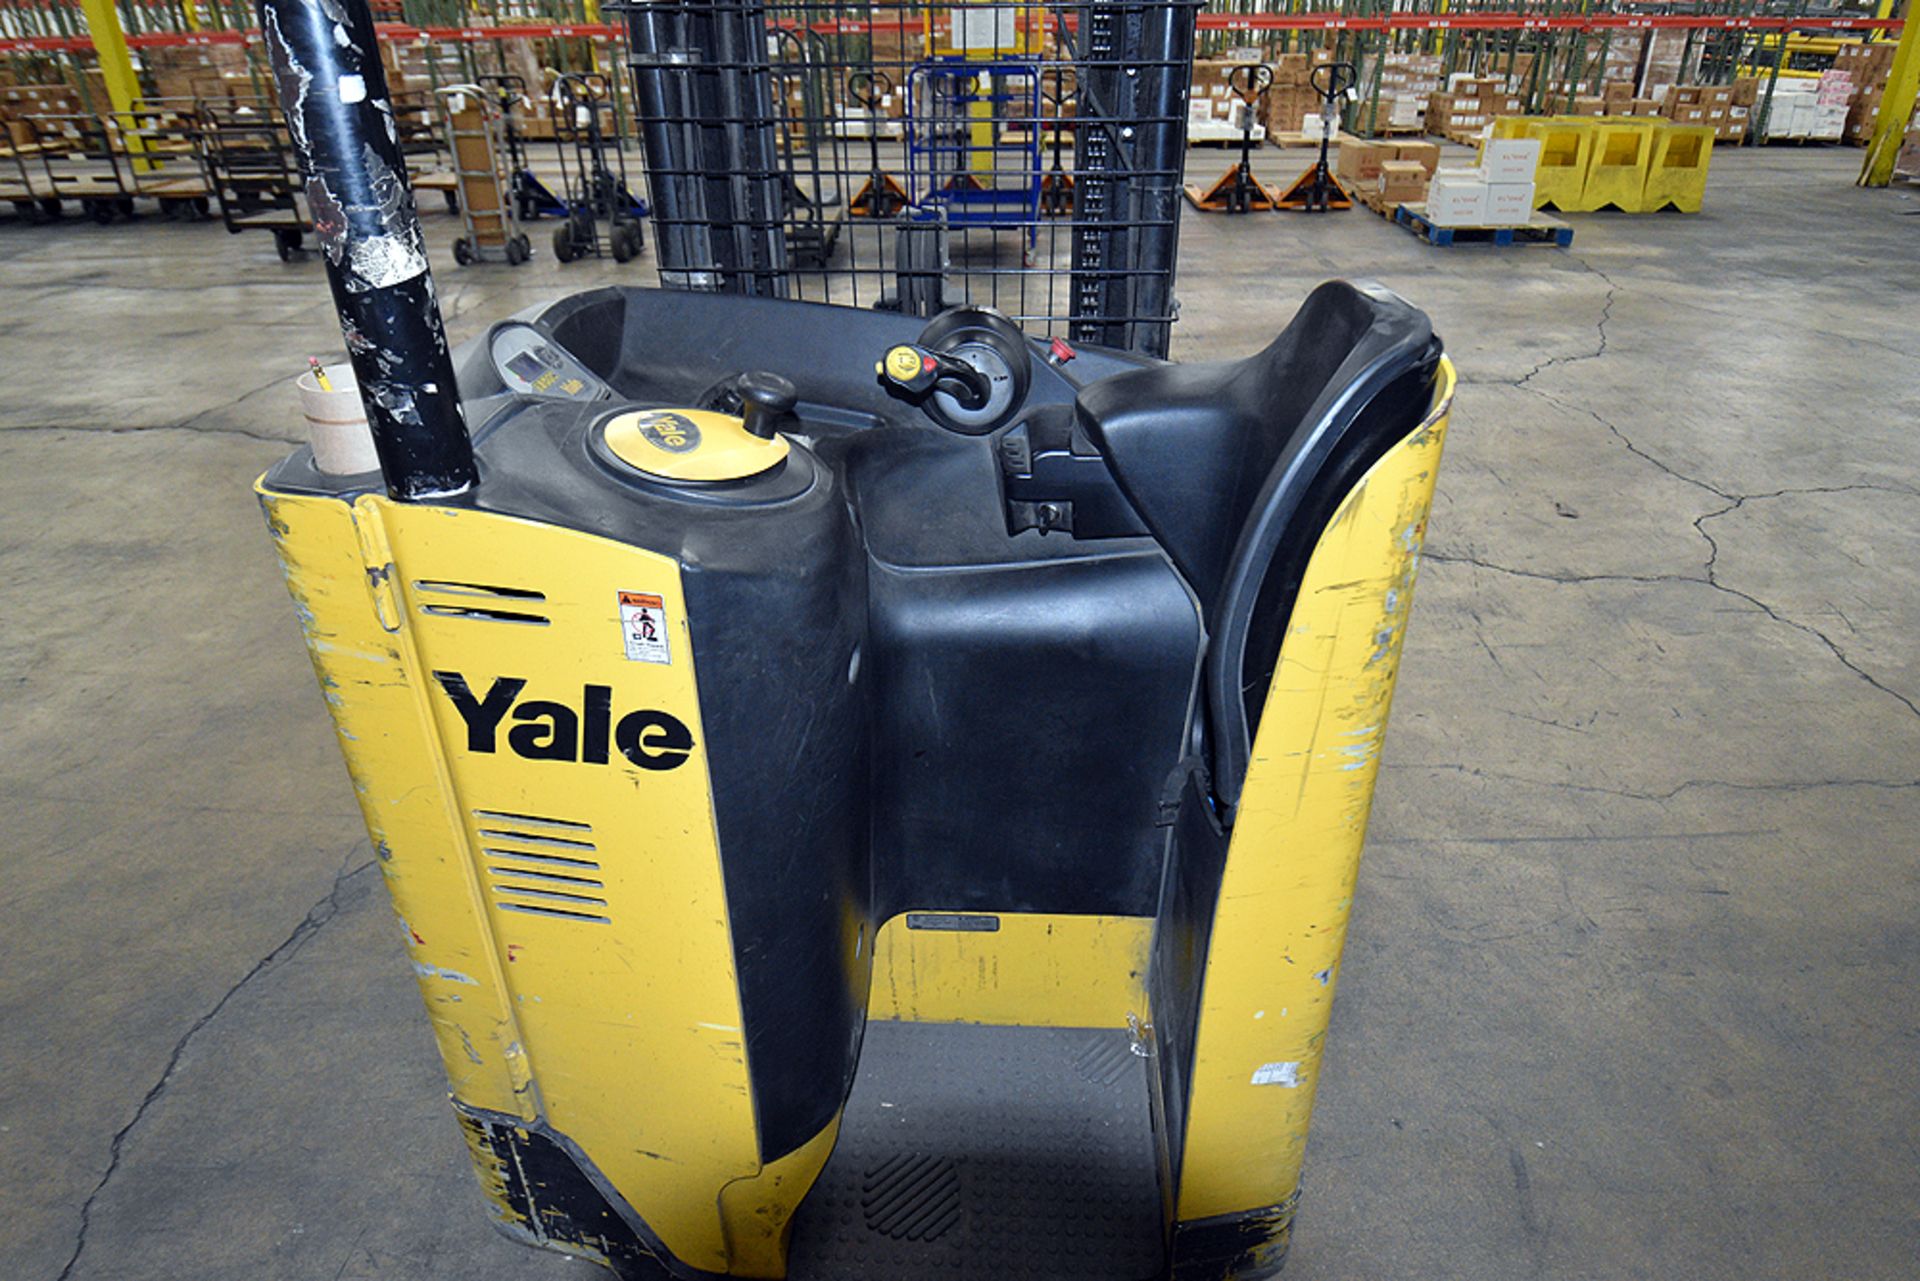 Yale 3,500 lbs. Capacity, Upright Reach Forklift w/ 203" Lift Height - Image 8 of 11